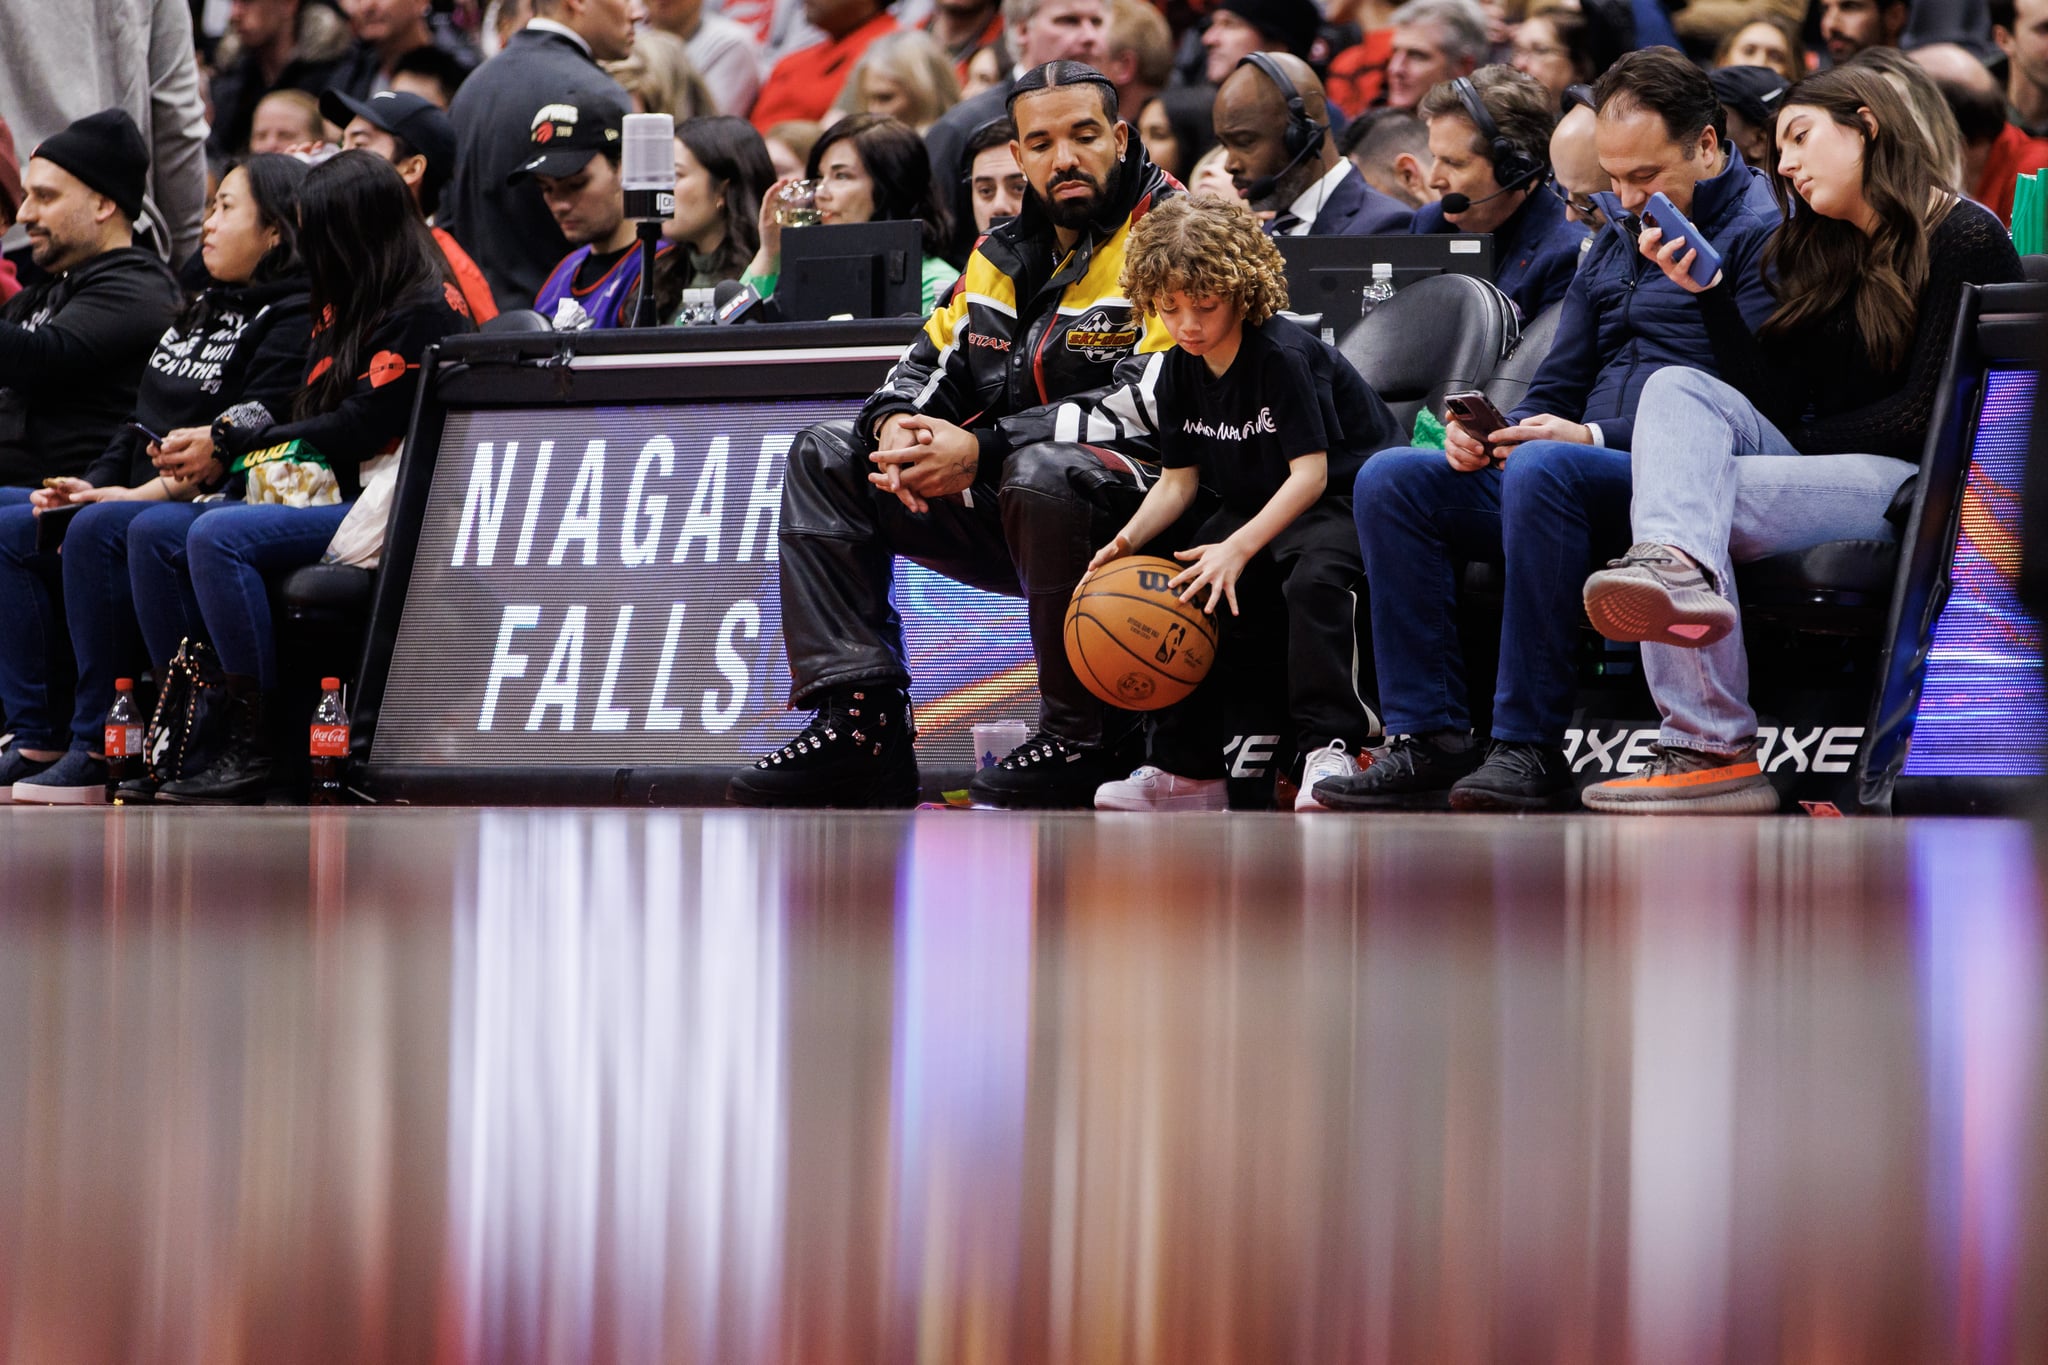 TORONTO, ON - DECEMBER 27: Rapper Drake watches his son Adonis dribble a basketball during the second half of the NBA game between the Toronto Raptors and the LA Clippers at Scotiabank Arena on December 27, 2022 in Toronto, Canada.